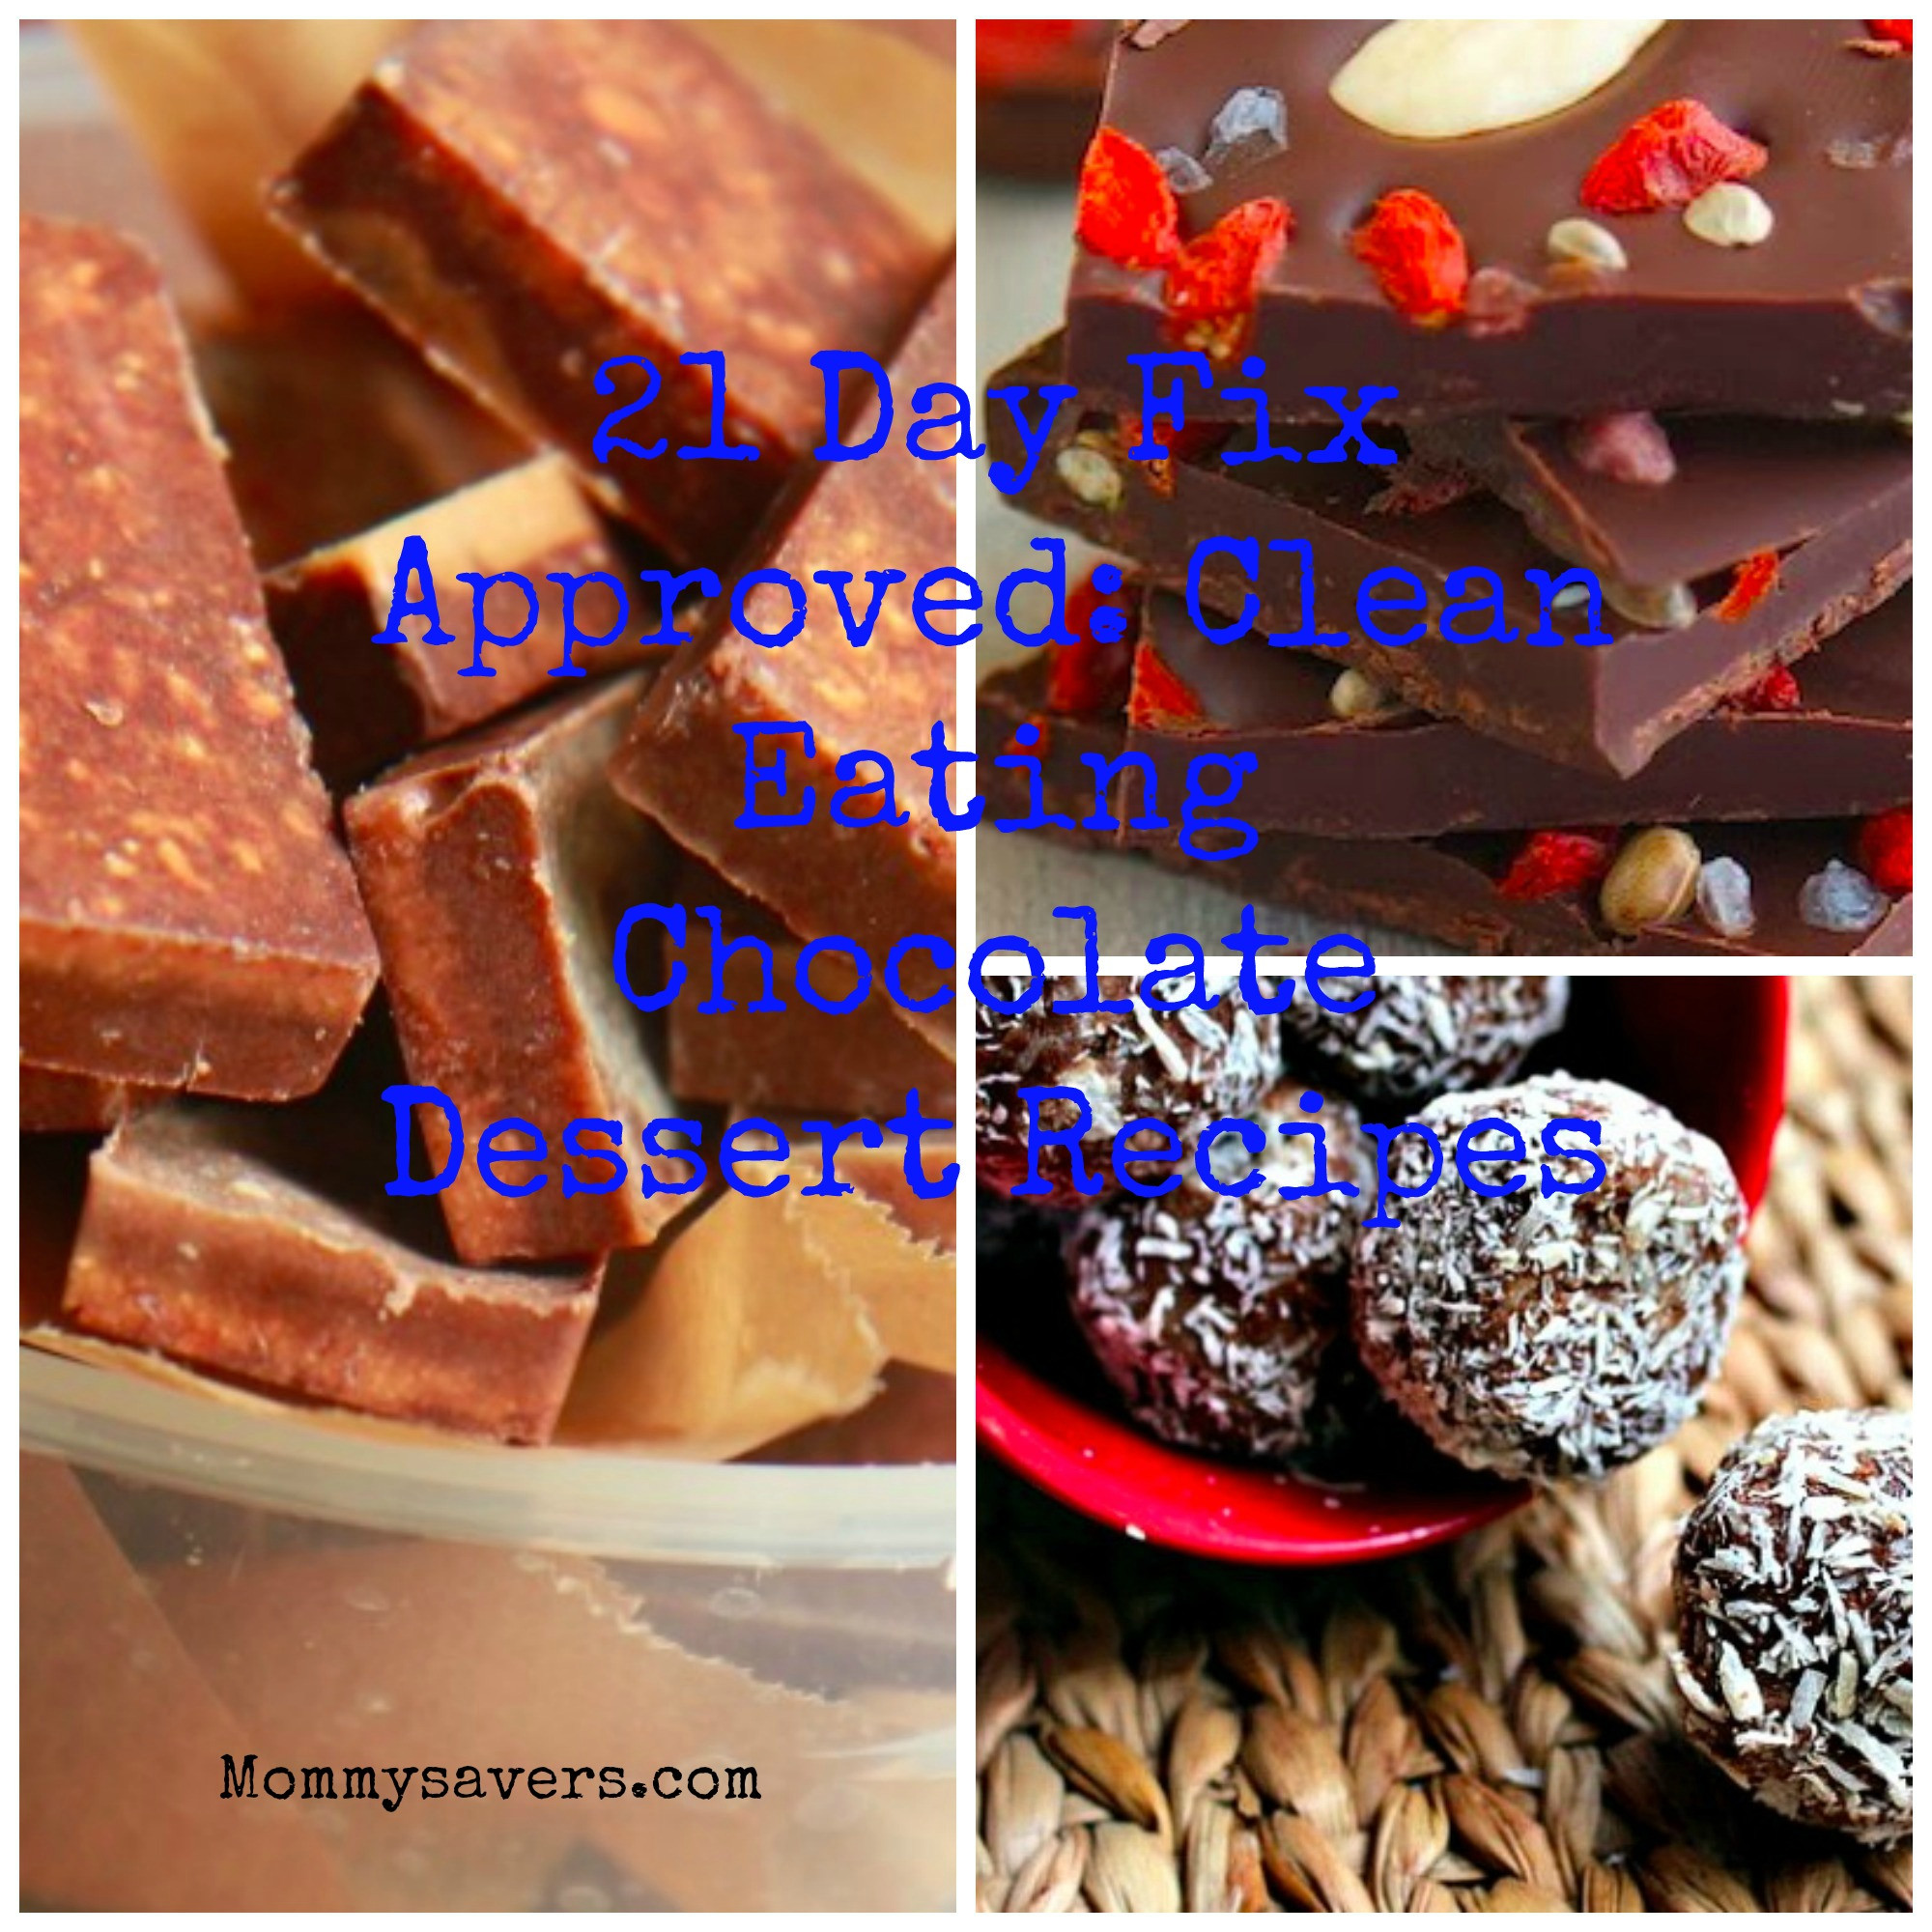 21 Day Fix Dessert Recipes
 21 Day Fix Approved Clean Eating Chocolate Dessert